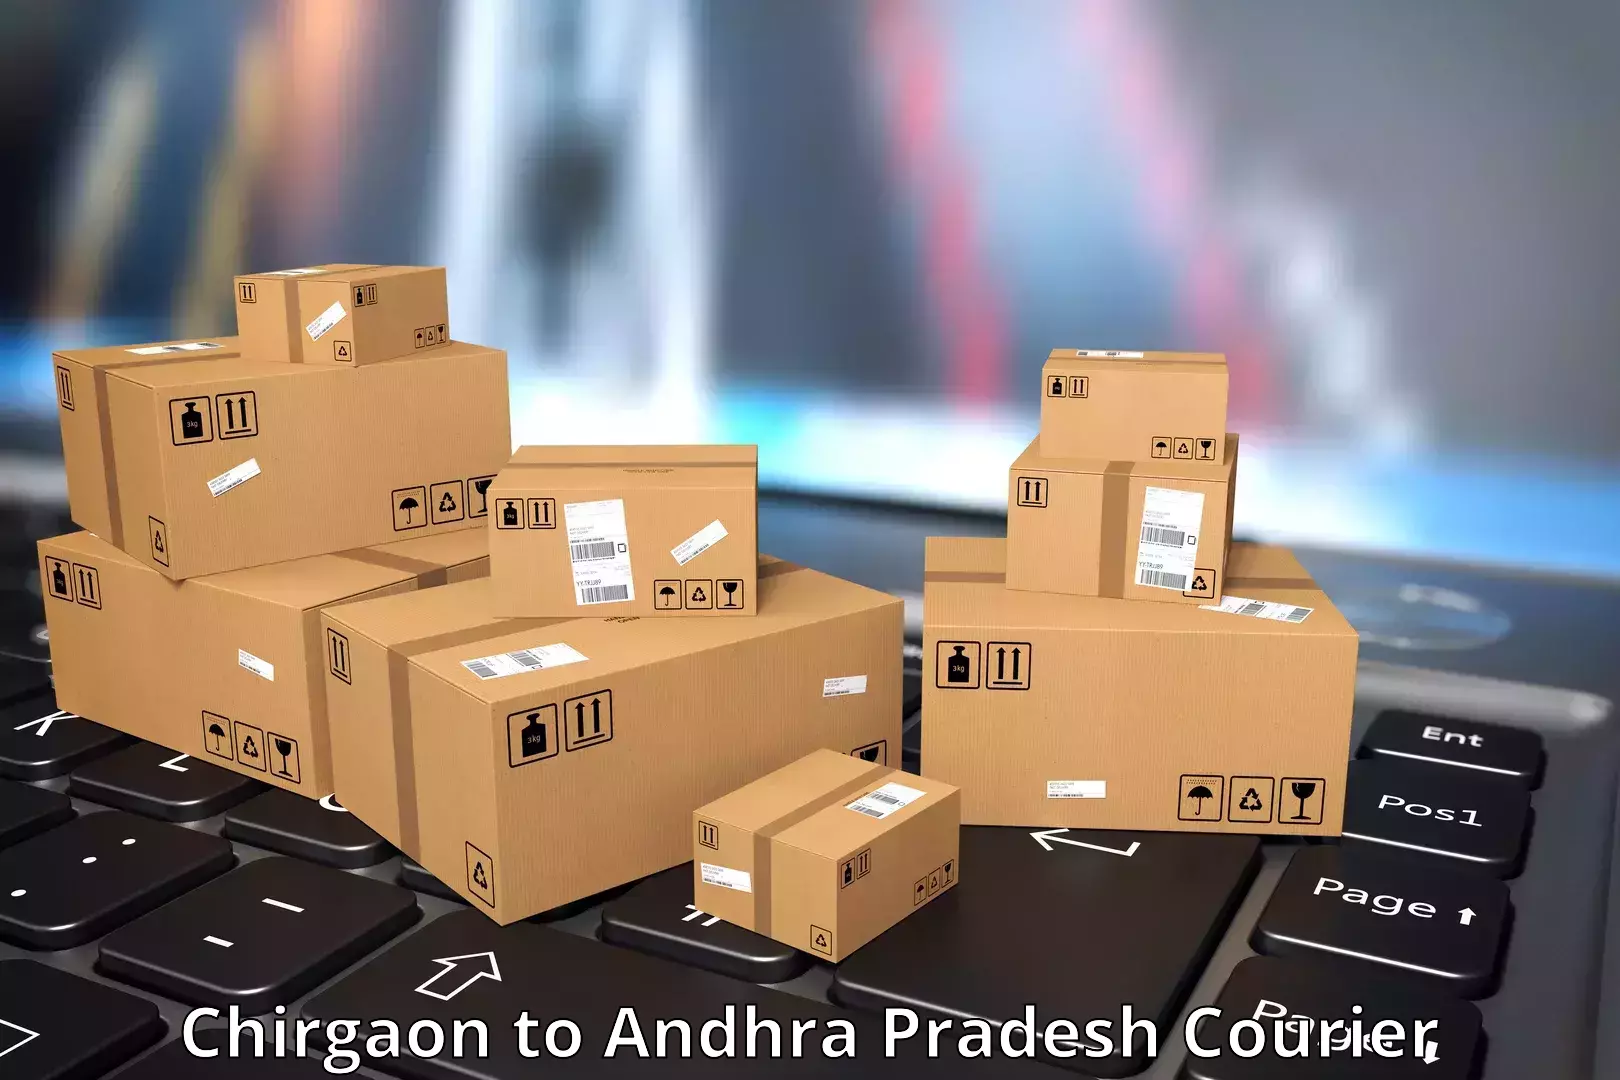 High-speed parcel service Chirgaon to Dhone